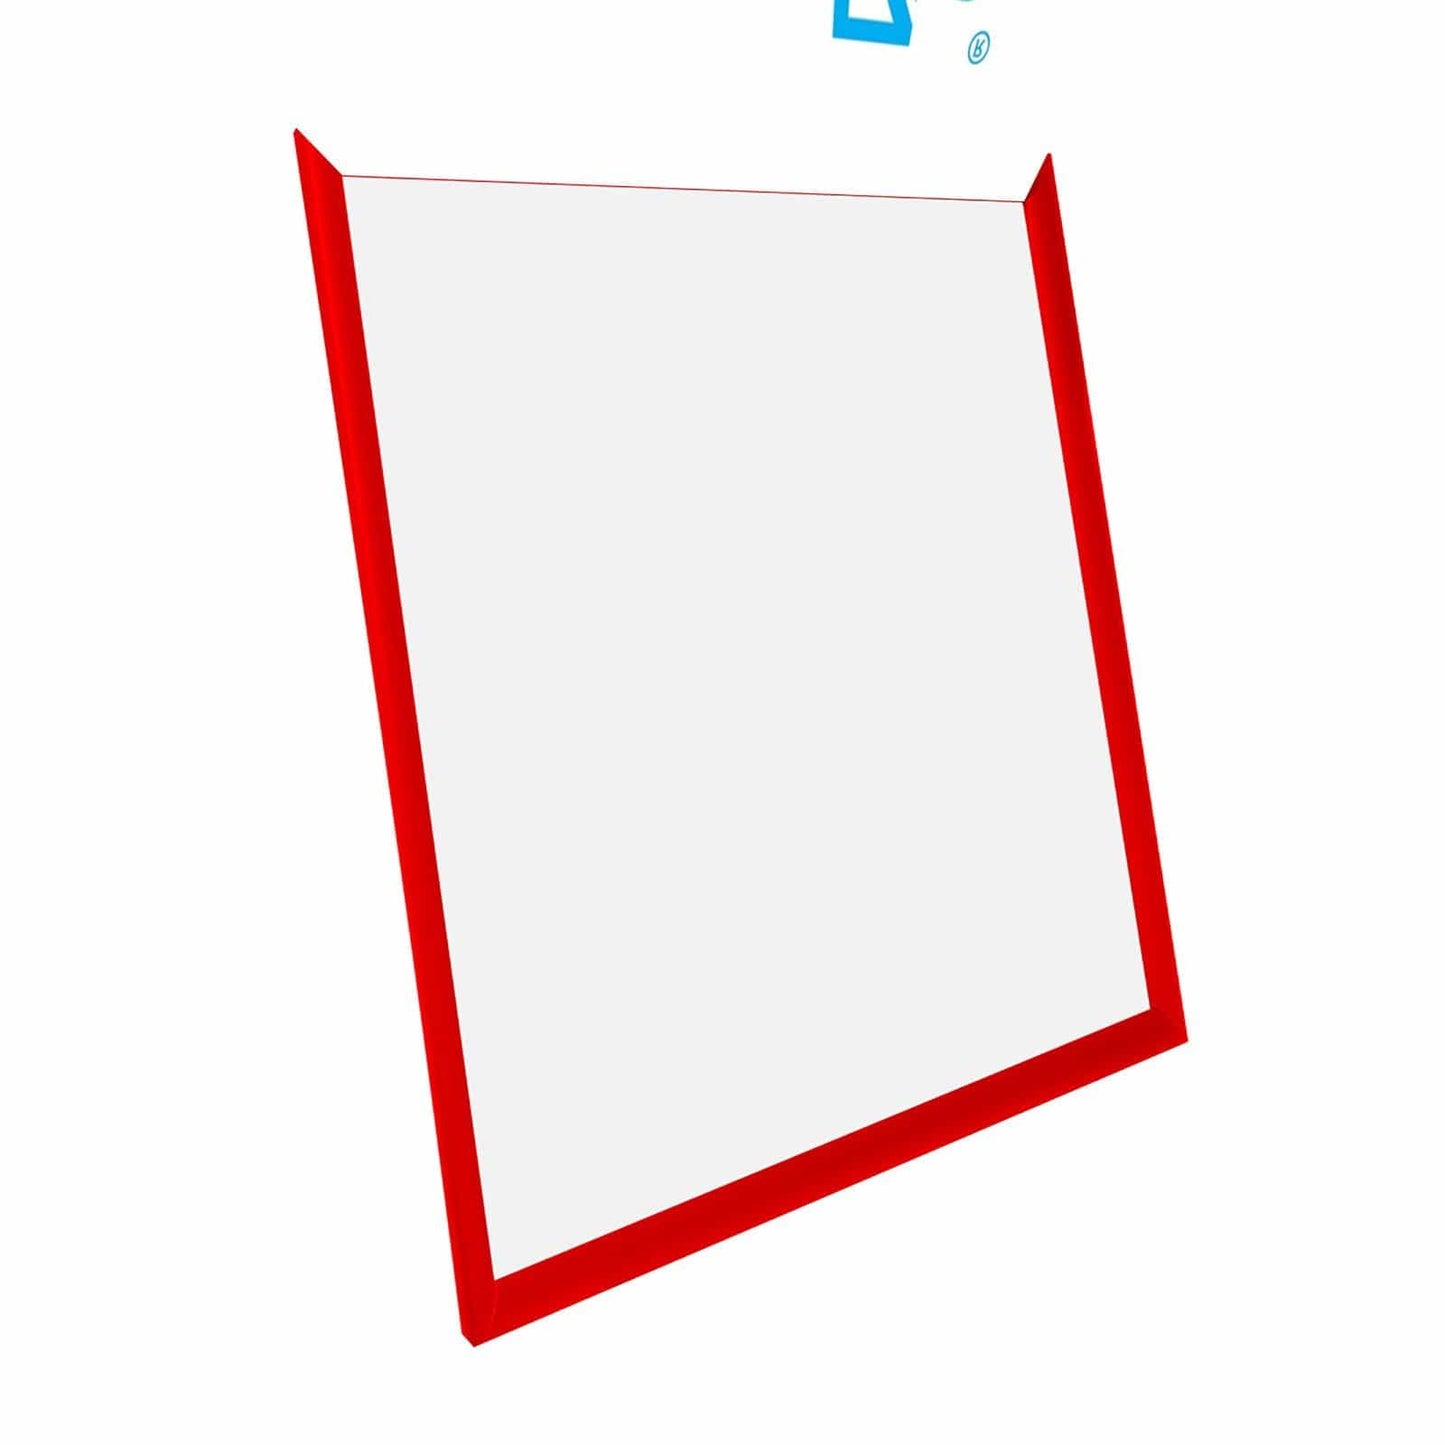 17x19 Red SnapeZo® Snap Frame - 1.2" Profile - Snap Frames Direct